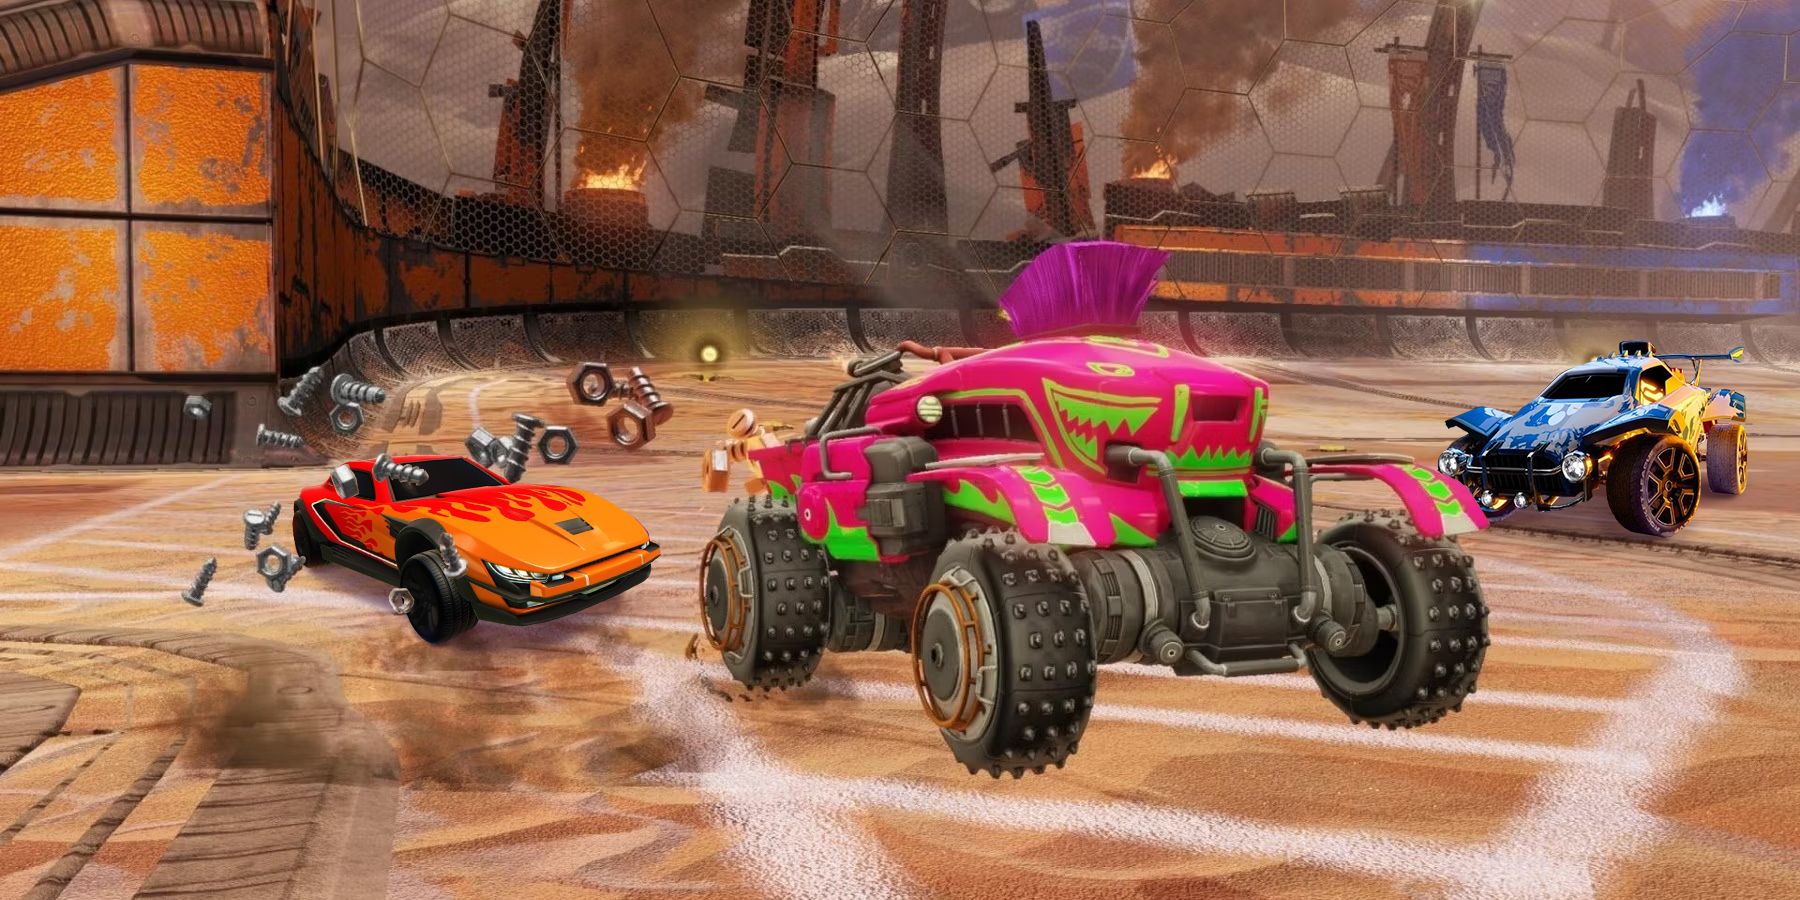 Octane, Grog, and Breakout are 3 of the 22 Best Cars In Rocket League